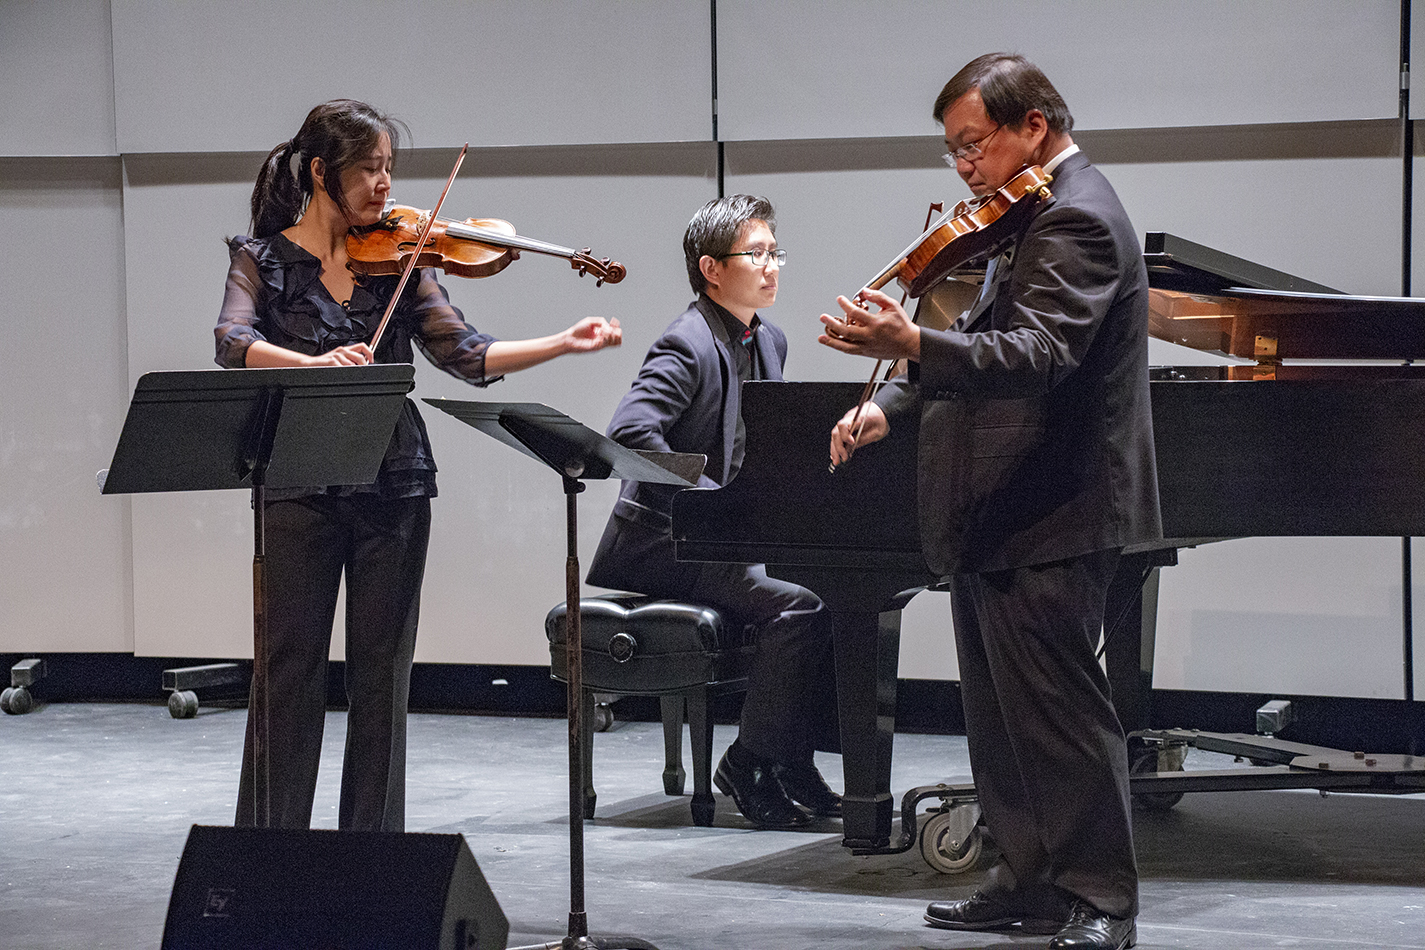 SE music adjunct instructors Tzu-Ying Chan and Michael Shih perform Johann Sebastian Bach’s “Concerto for Two Violins in D Minor” during the Faculty Music Recital Oct. 18 in the C.A. Roberson Theatre on SE Campus.